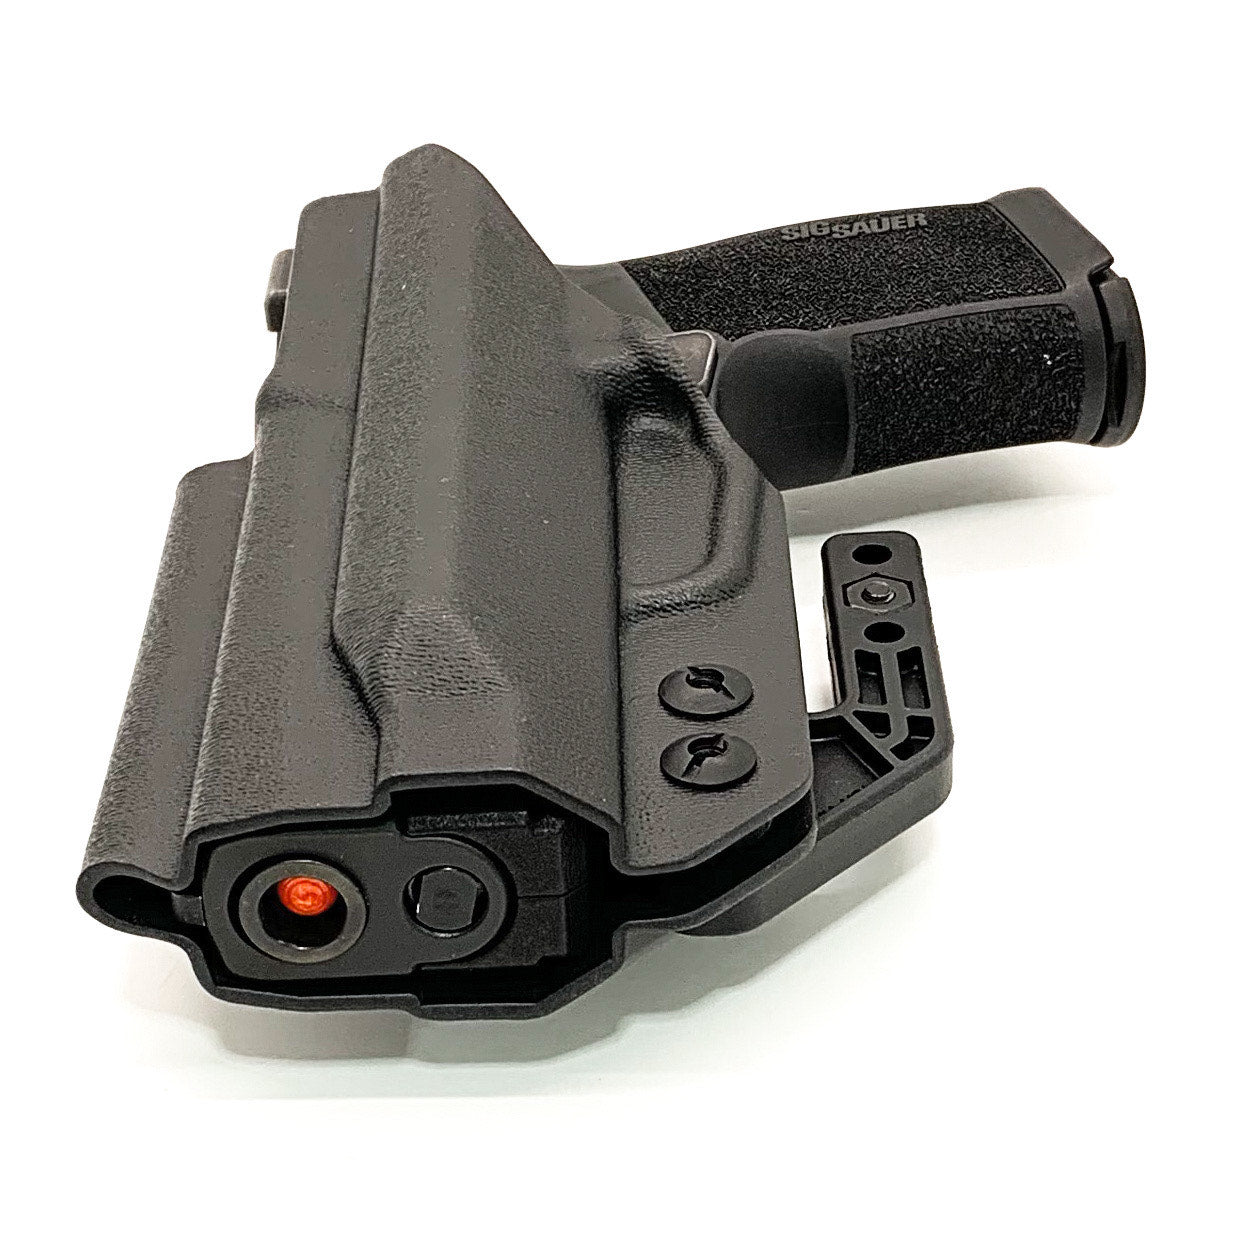 Inside waistband holster designed to fit the Sig Sauer P365 and P365XL pistol series with the Tactical Development Pro Ledge Tactical Application Rail installed.  This holster will fit the Sig P365, P365X, P365XL Spectre, P365 XL RomeoZero, P365X RomeoZero, P365 SAS and P365XL Spectre Comp with the Pro Ledge Rail.